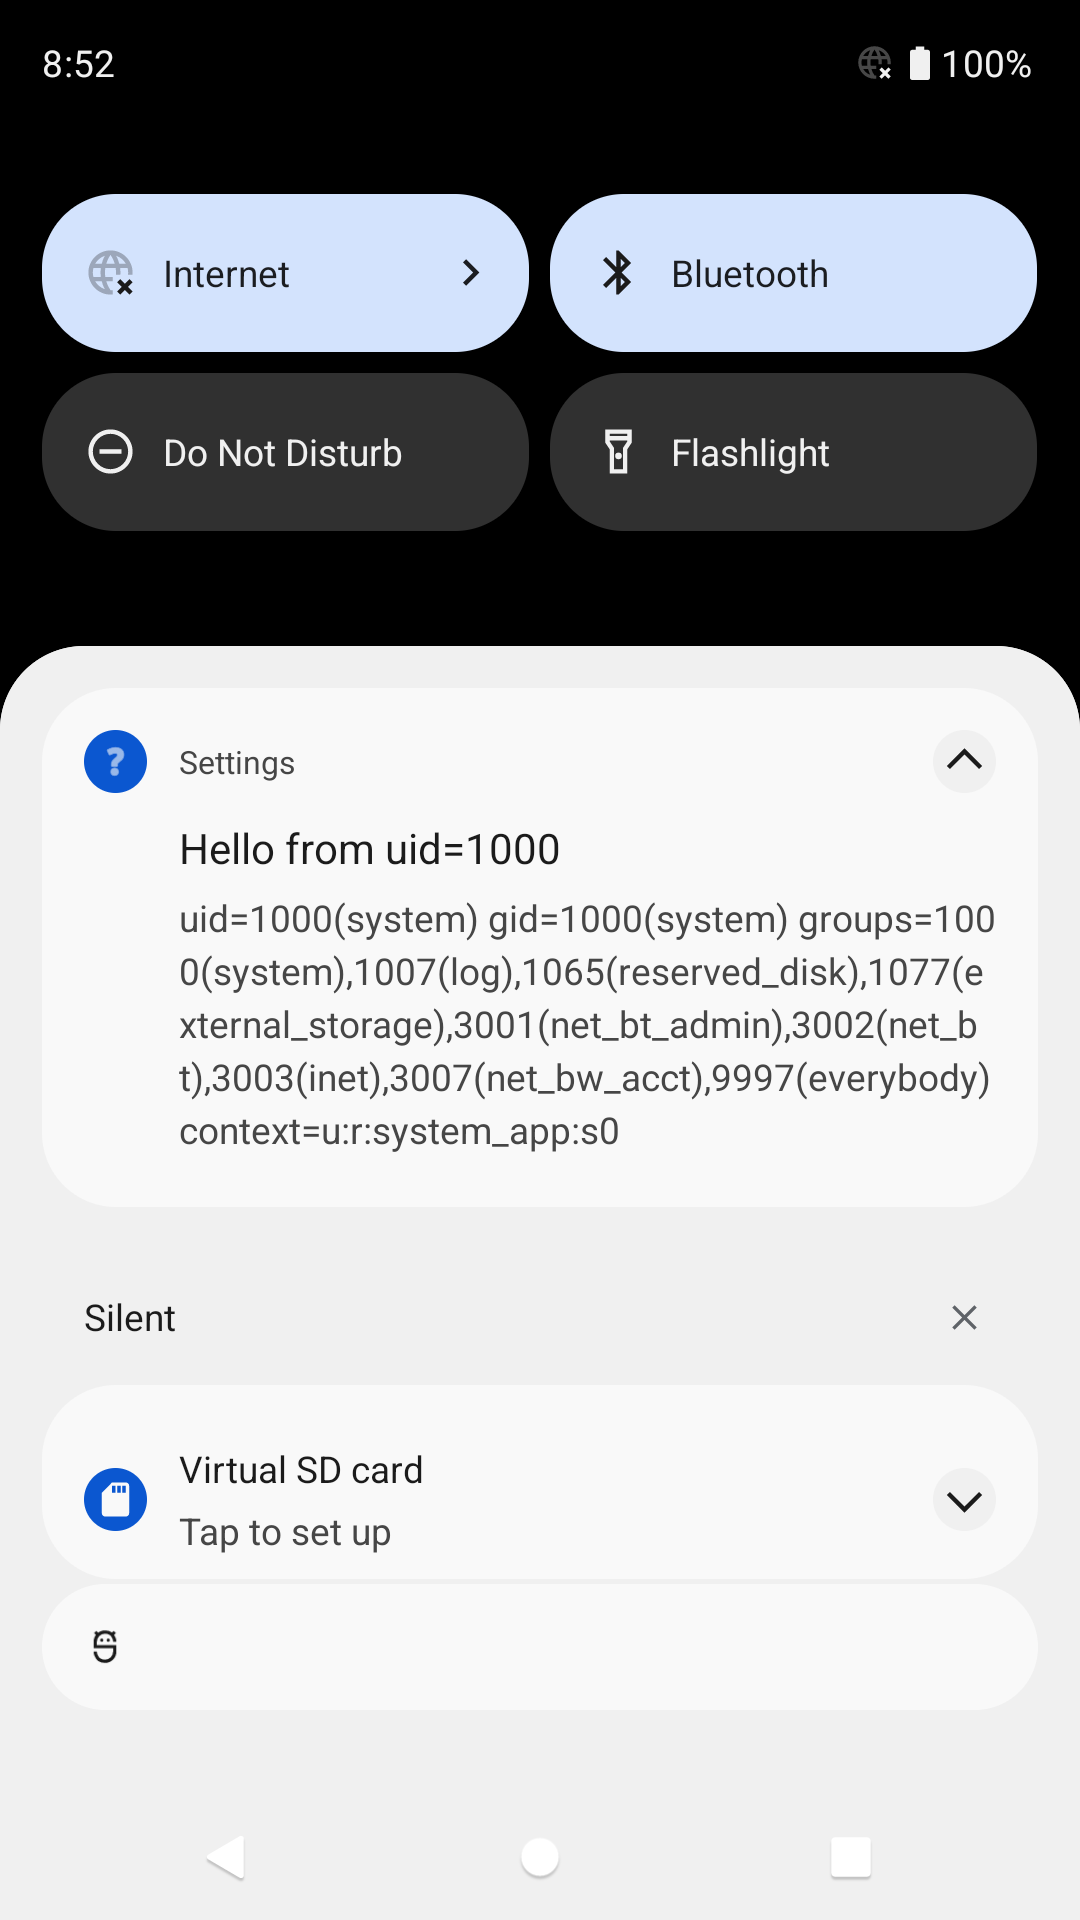 Screenshot of Android notification from Settings app: Hello from uid=1000(system) gid=1000(system) groups=1000(system),1007(log),1065(reserved_disk),1077(external_storage),3001(net_bt_admin),3002(net_bt),3003(inet),3007(net_bw_acct),9997(everybody) context=u:r:system_app:s0